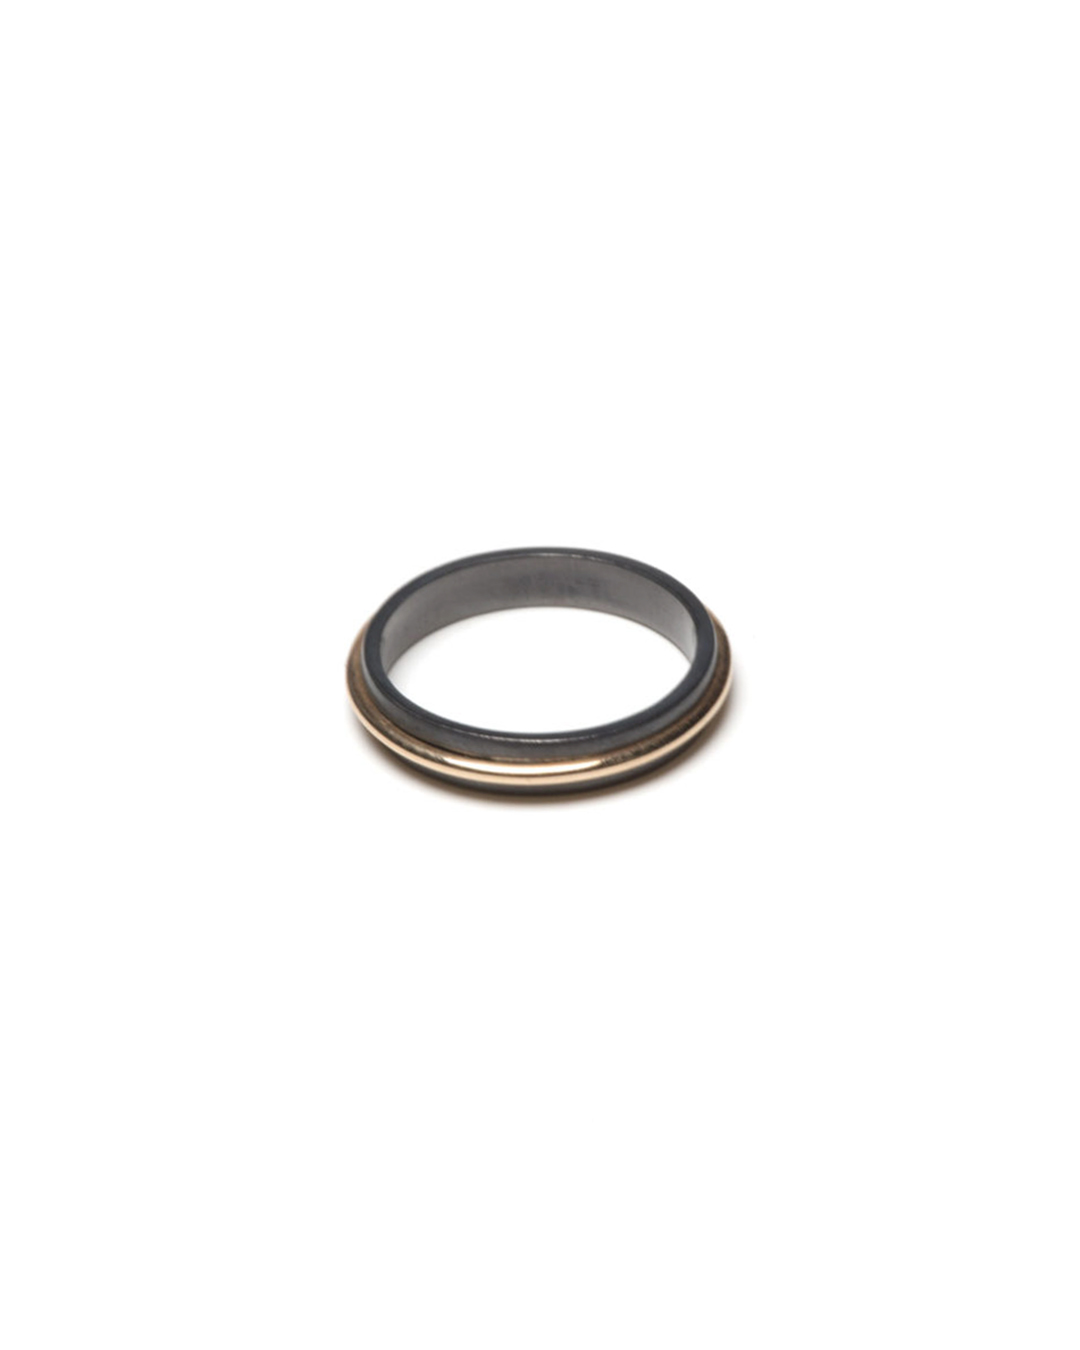 Coen Mulder, untitled, 2019, ring; gold, tantalum, price on request